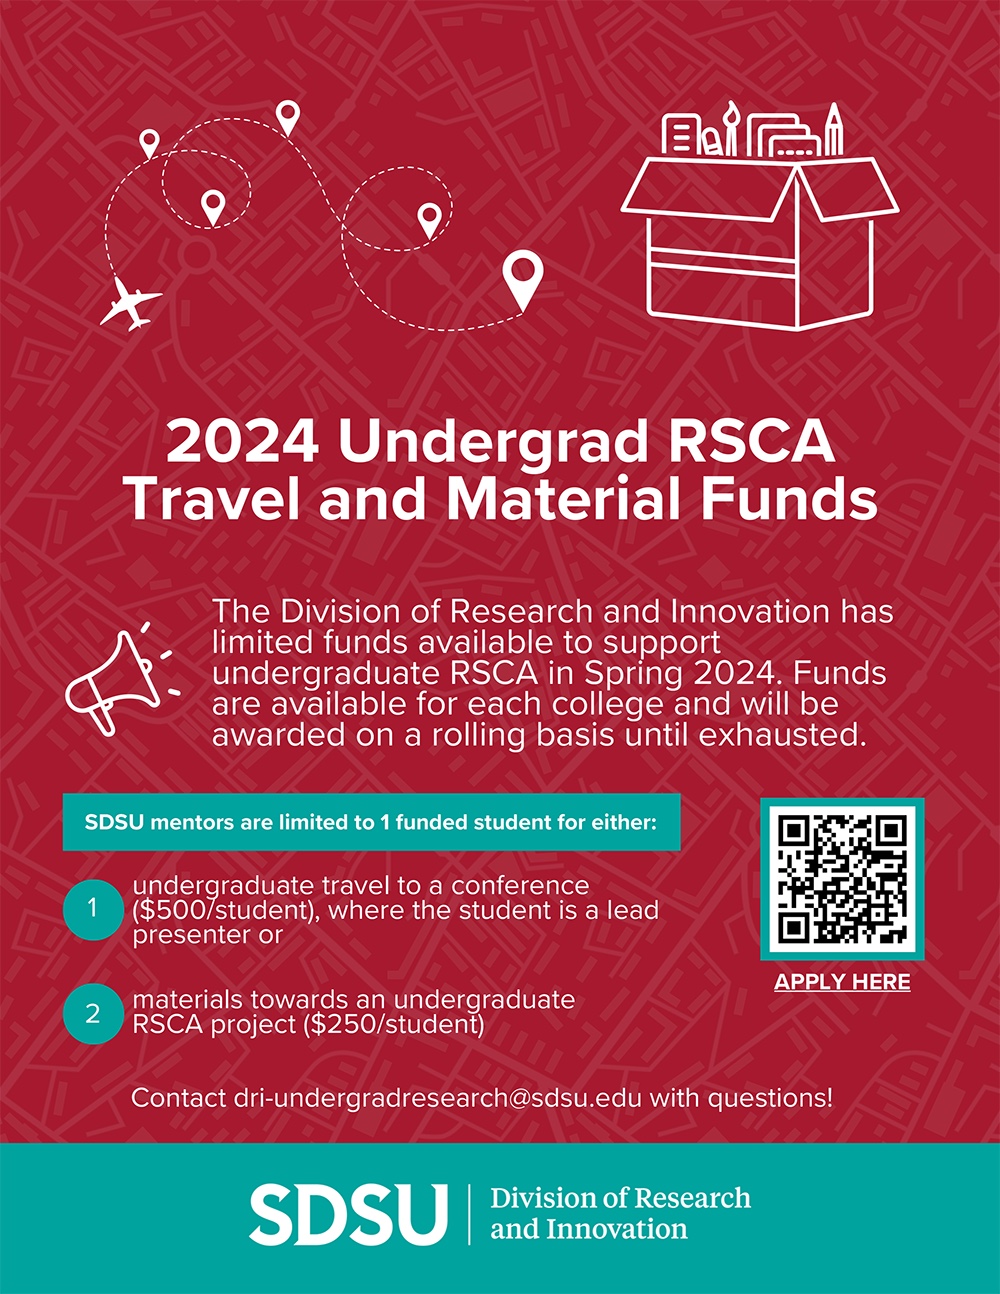 red background with white headline text saying "2024 Undergrad RSCA Travel and Material Funds" and white icons of a traveling plane and a box of art supplies with resource information listend and QR code to apply for the funds. see story, right, for more information.